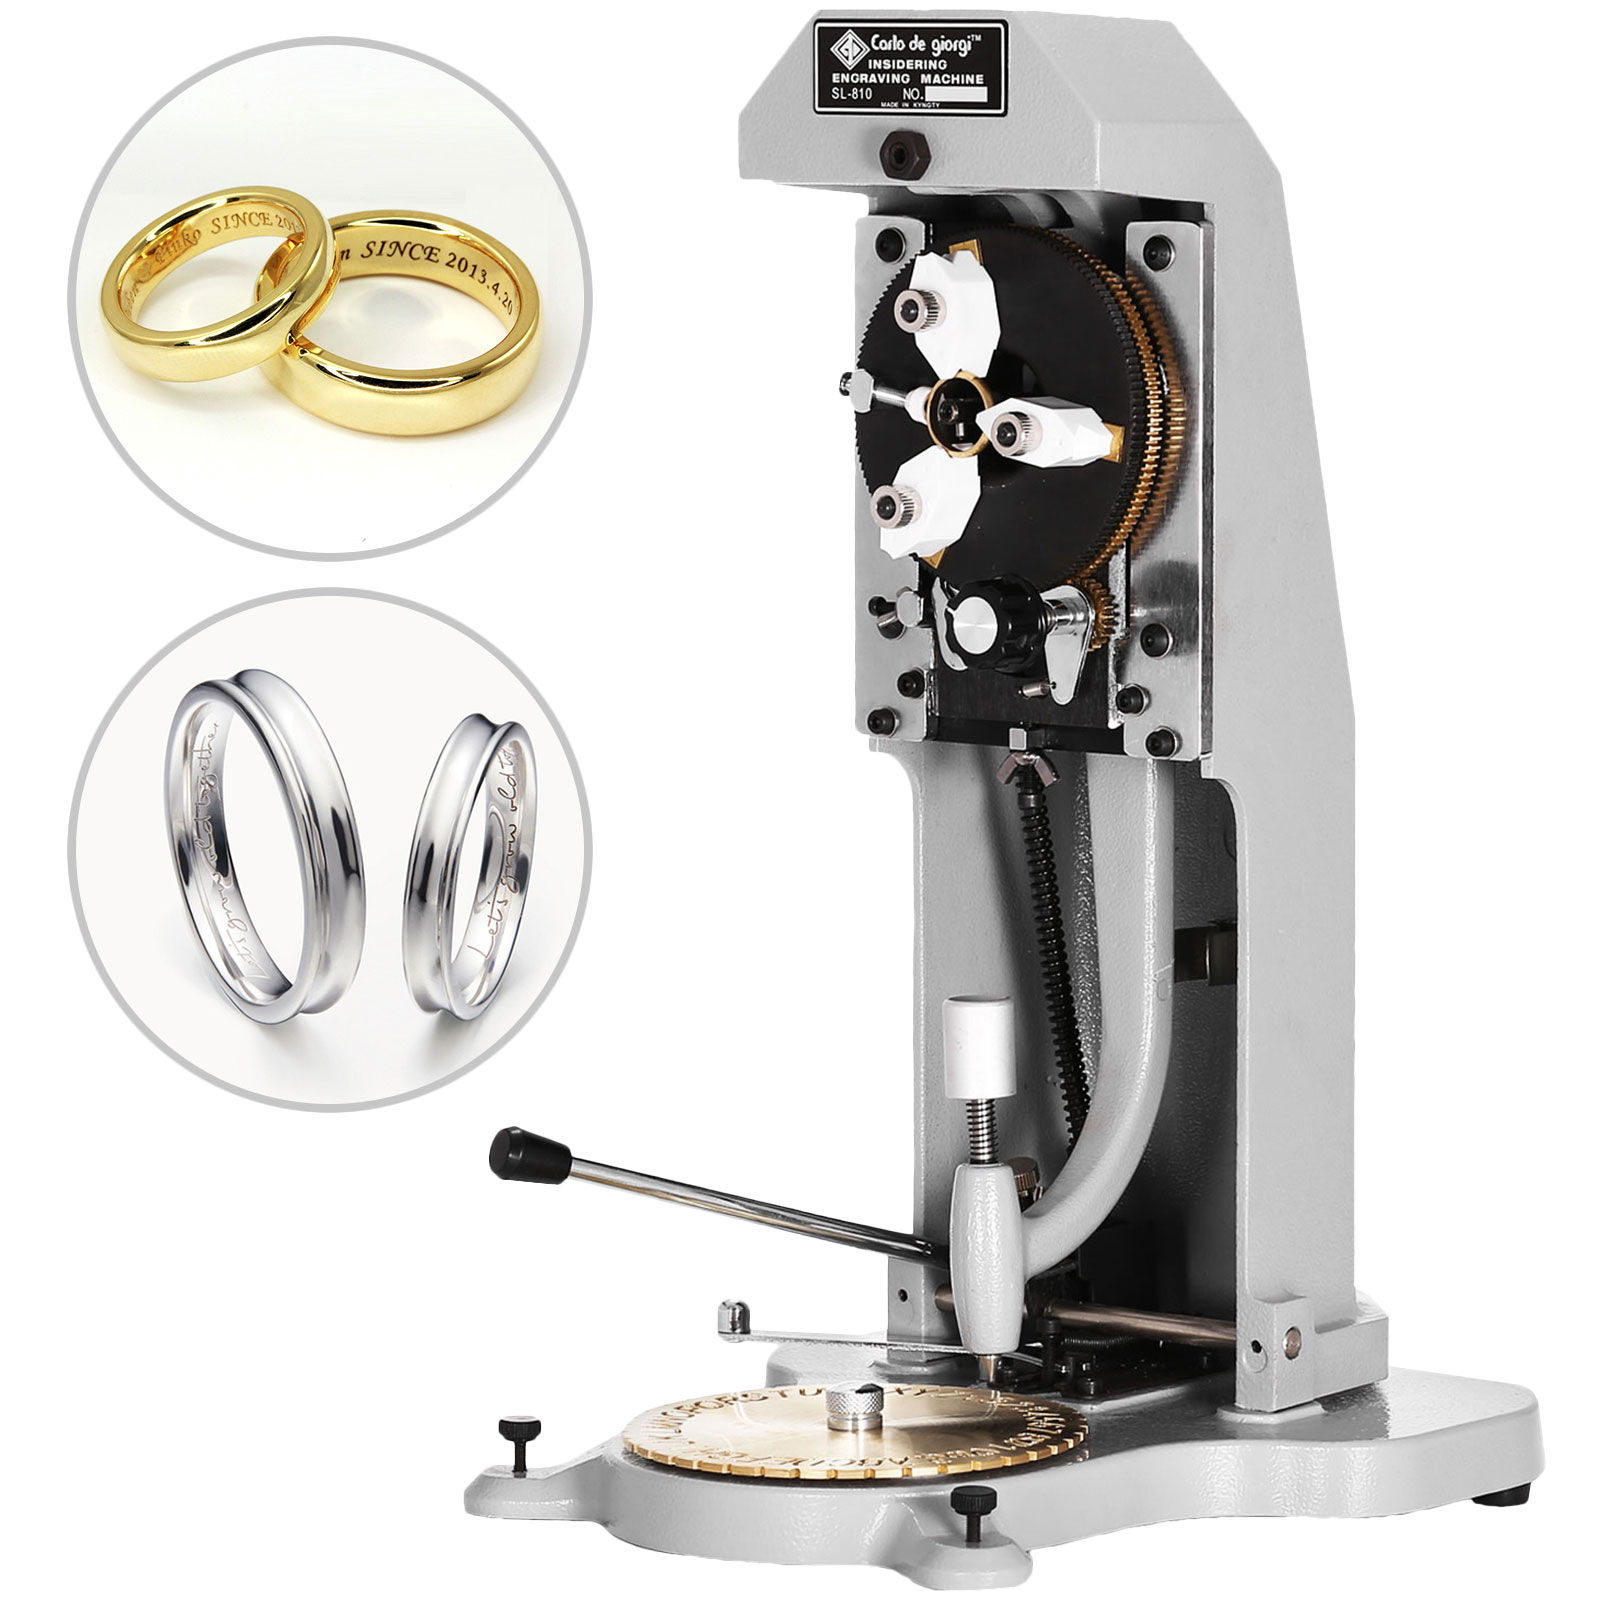 Laser Engraving Machine For Jewelry All You Need to Know